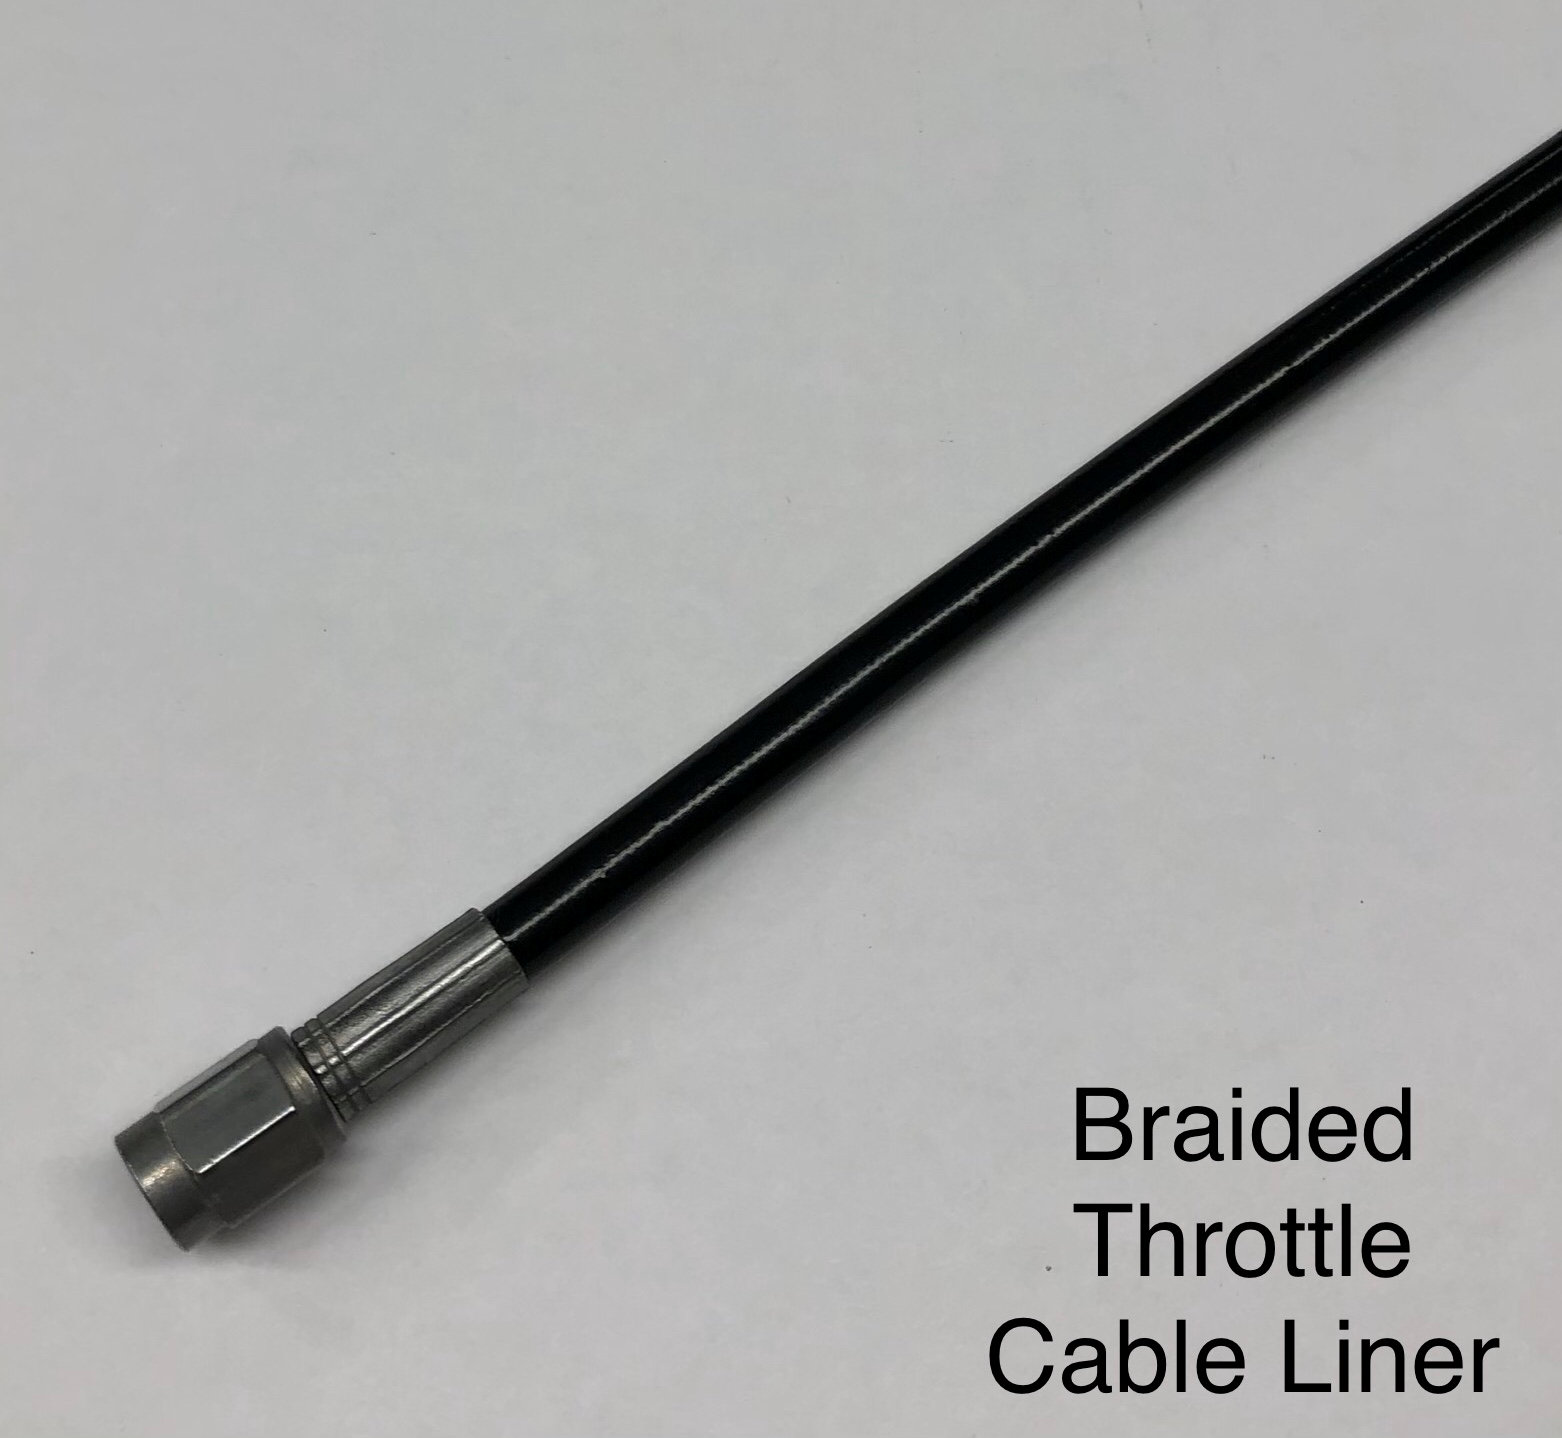 Braided Throttle Cable Liner